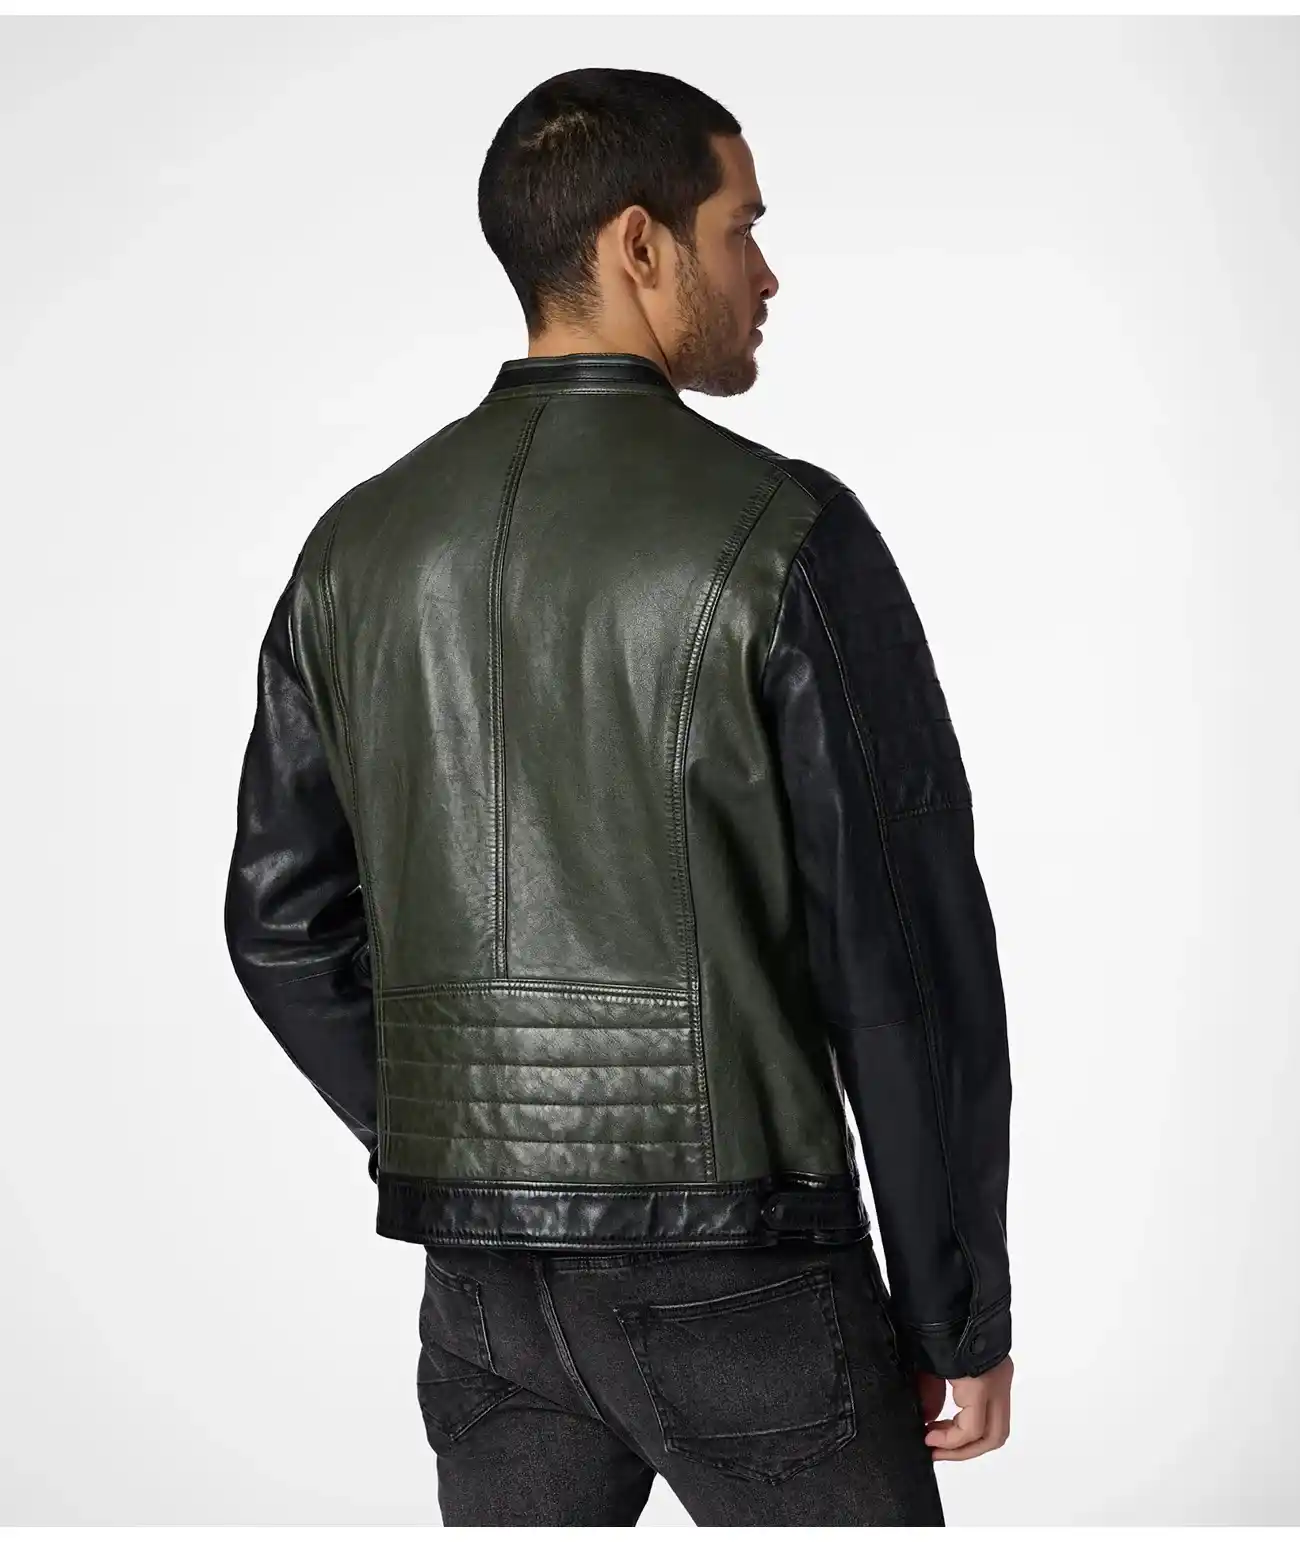 Dark Green With Black Leather Jacket